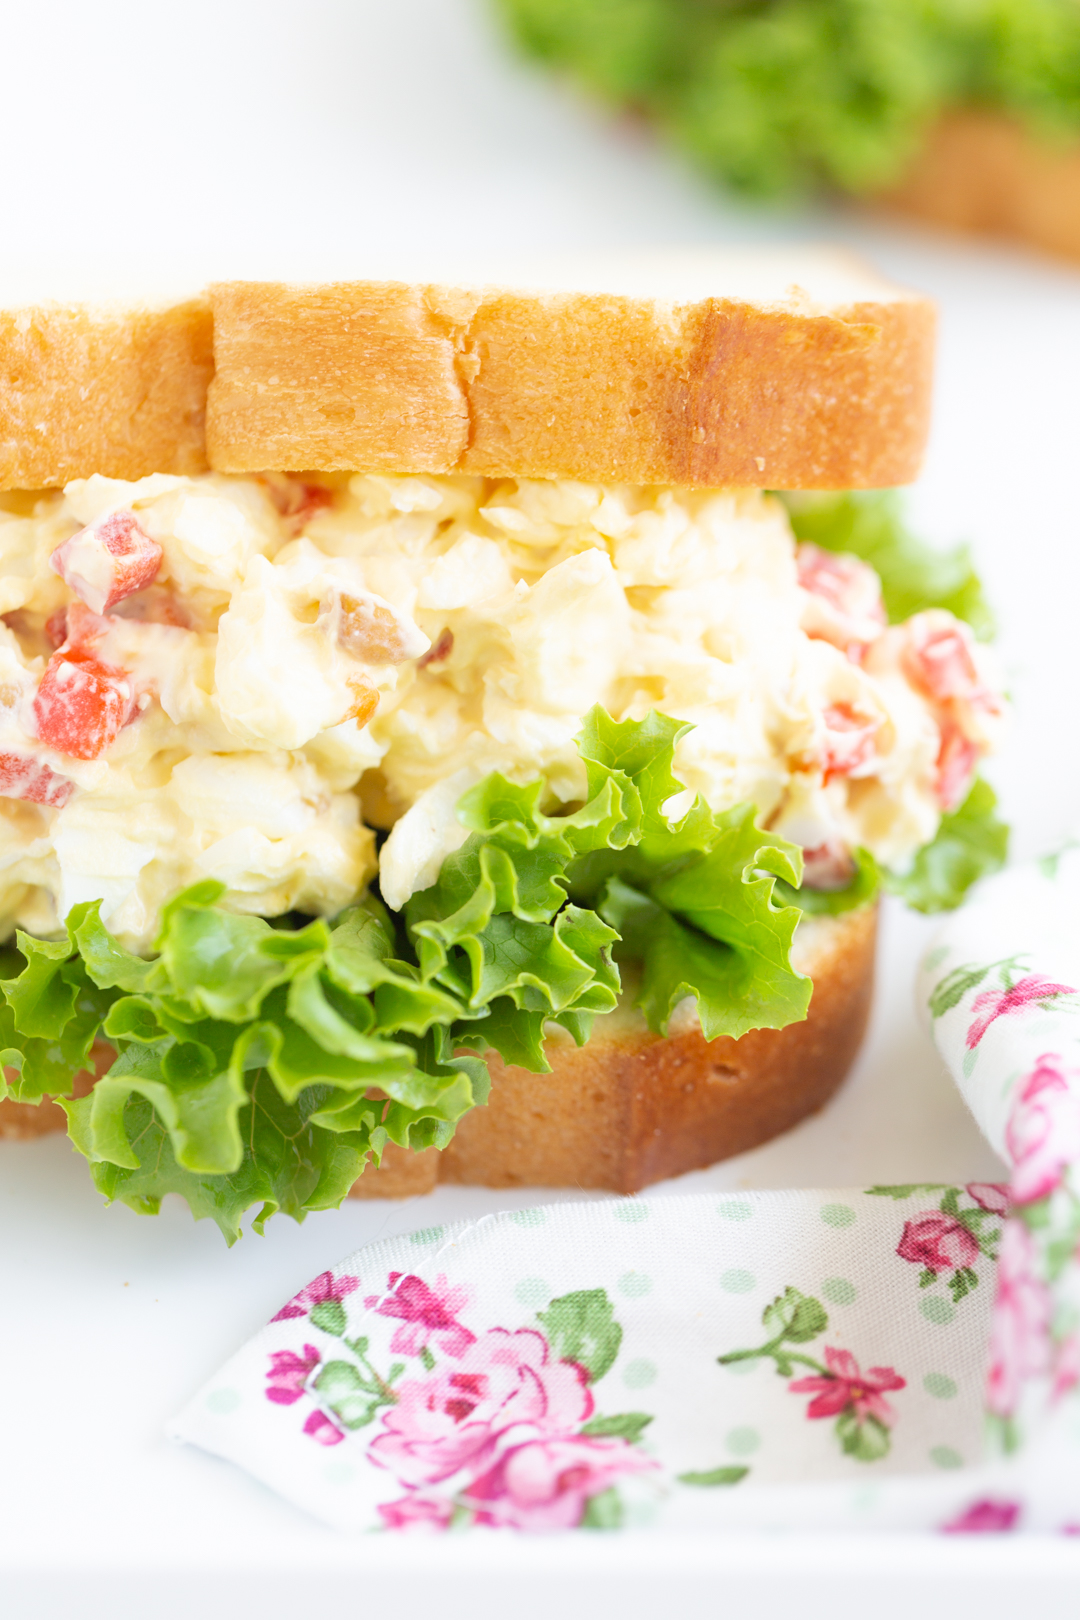 up close view of radio sandwich. unique egg salad recipe passed down generations.